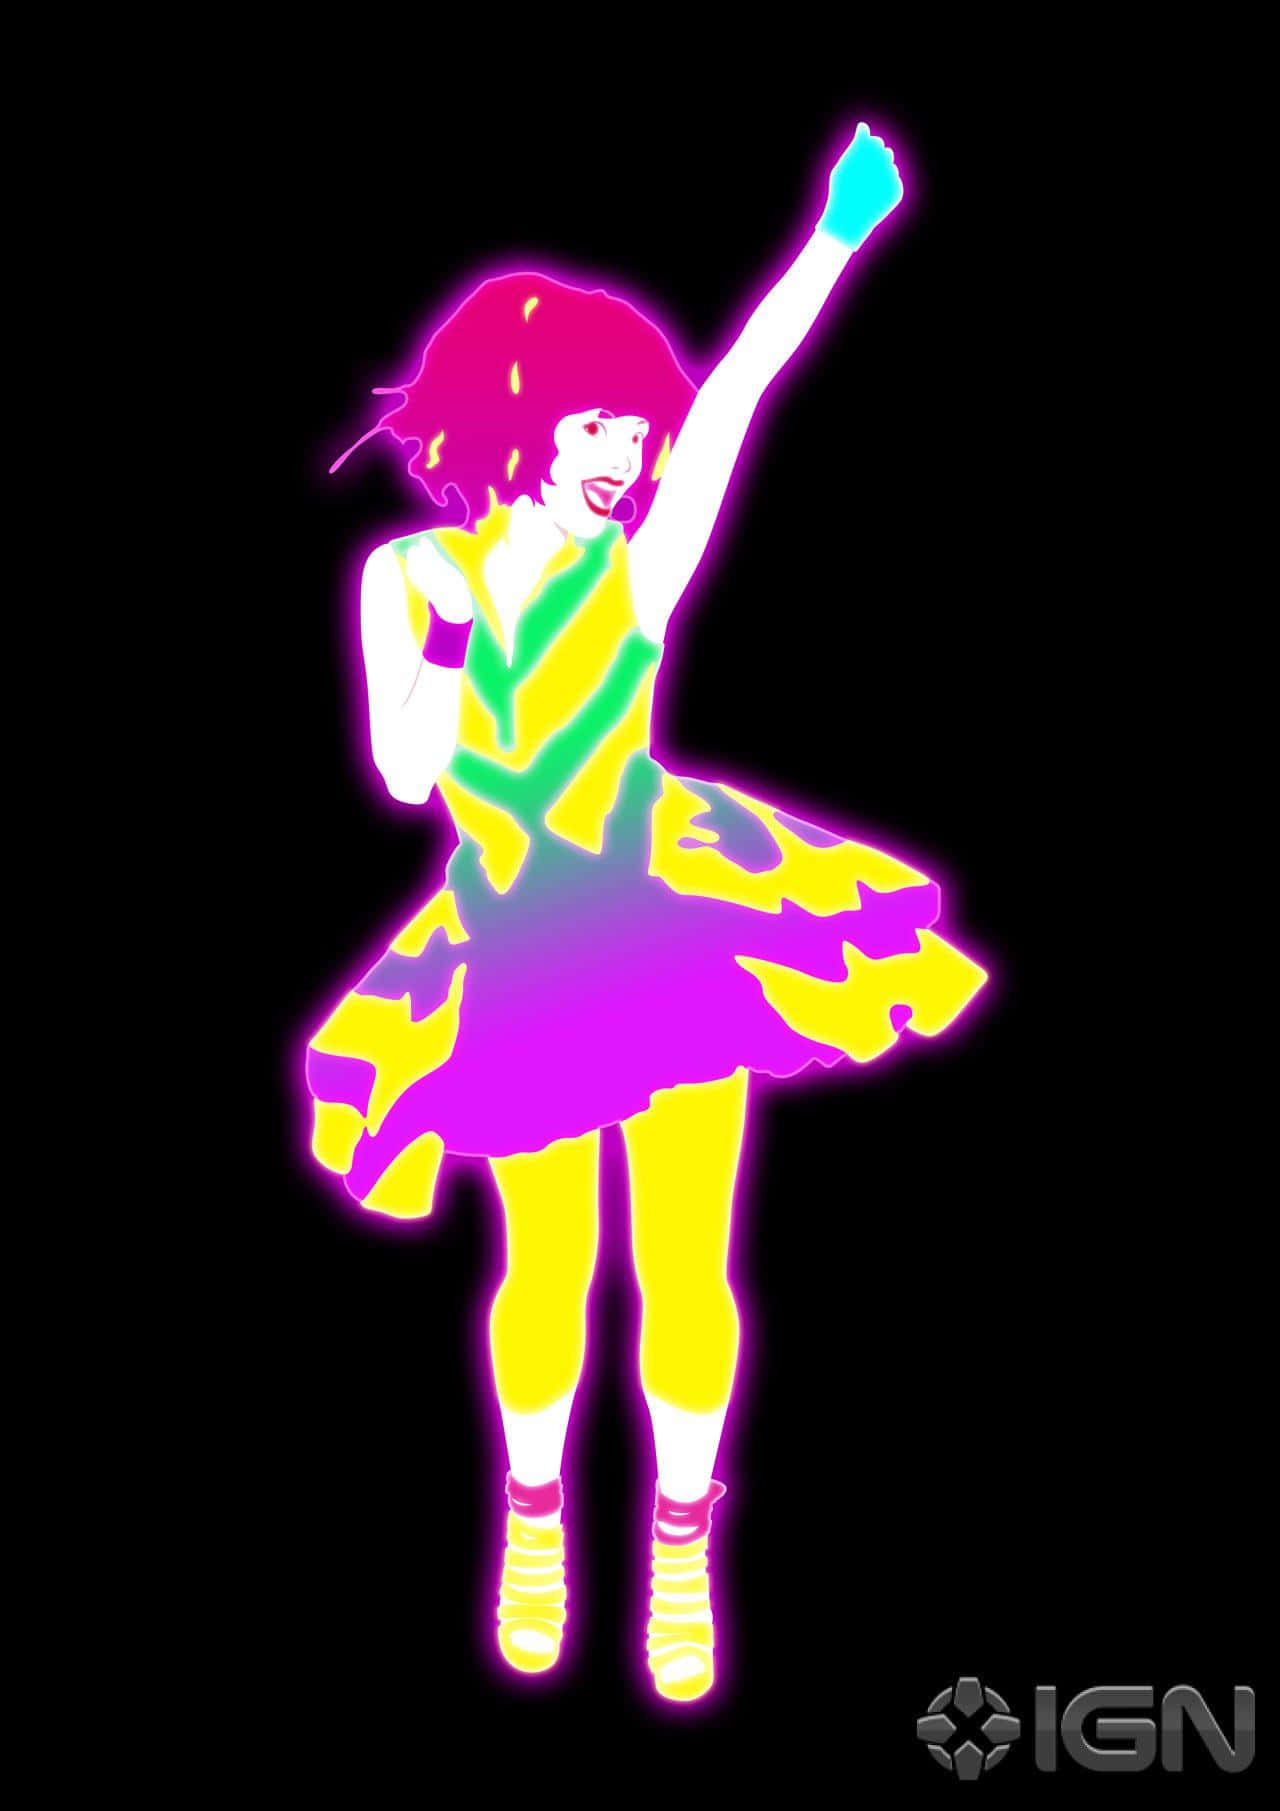 Energetic Dancers in Colorful Illustration from Just Dance Game